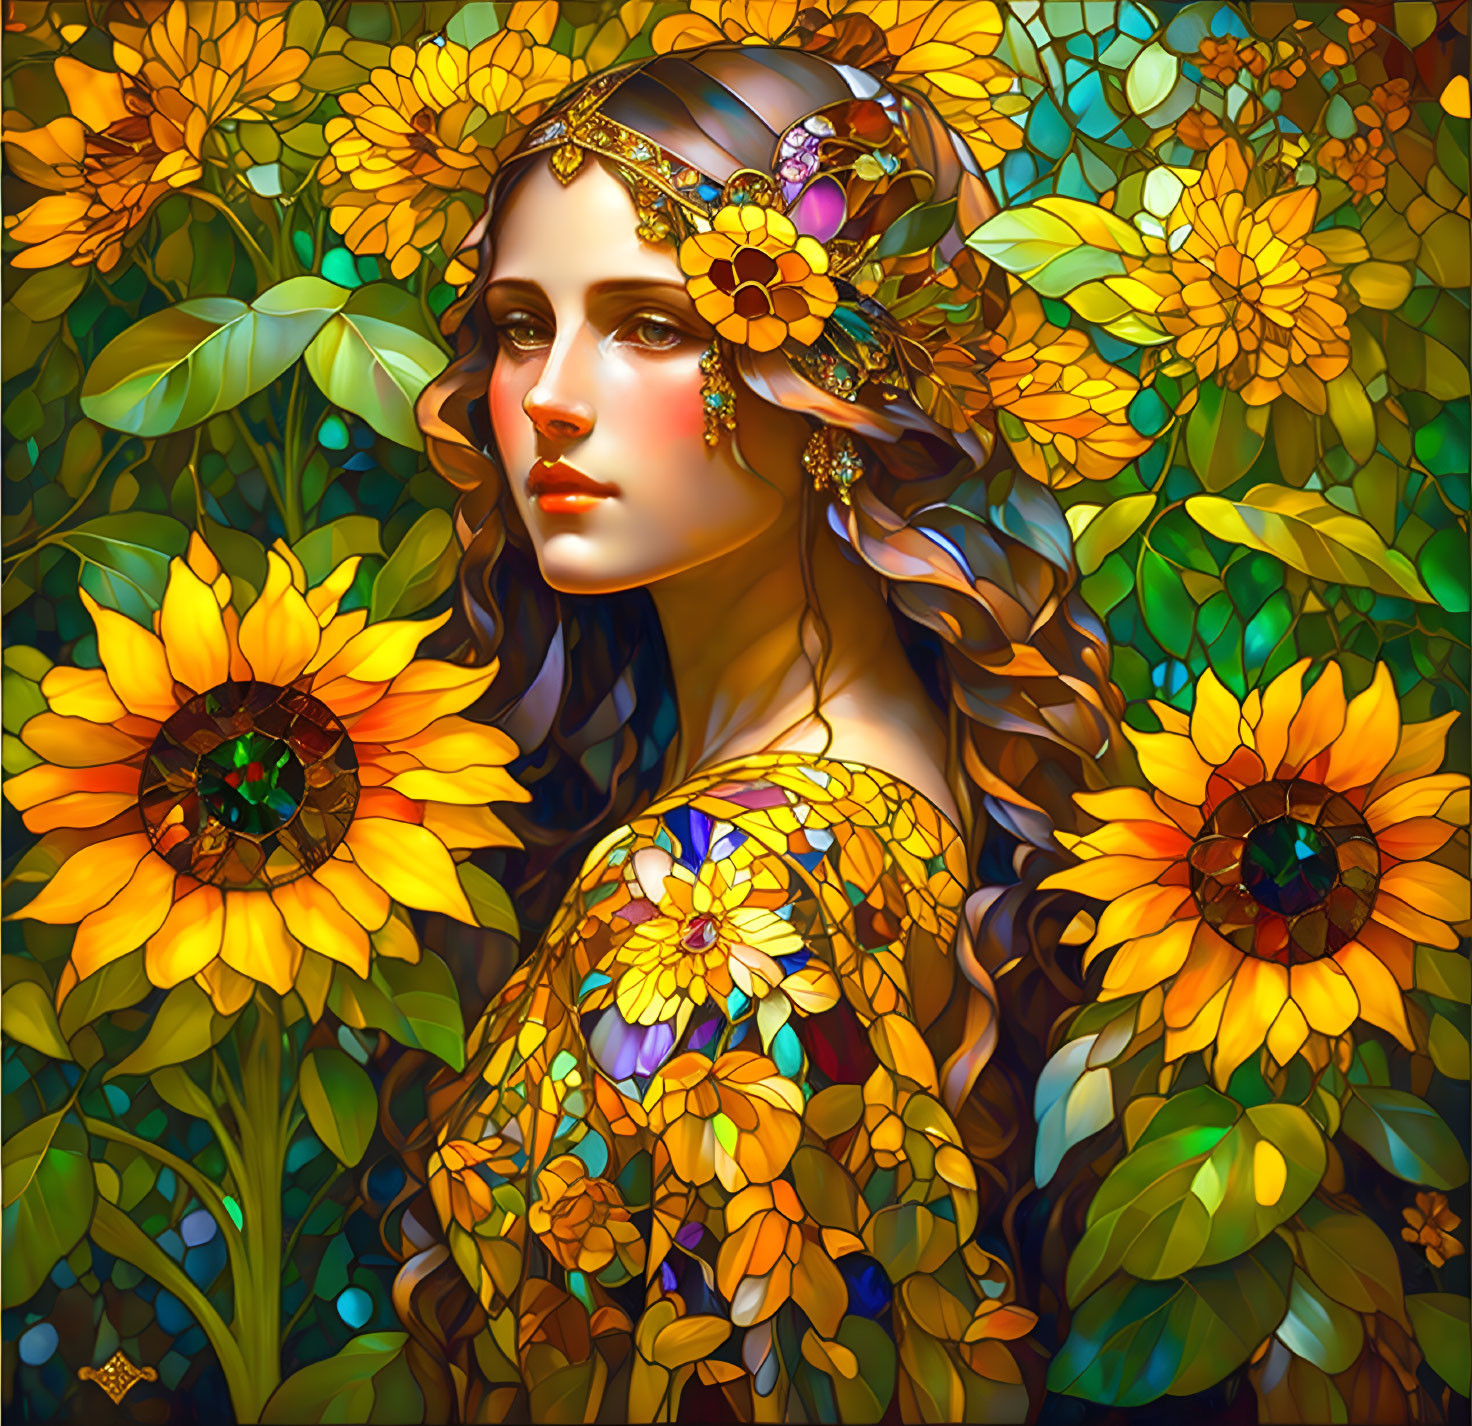  lady and sunflowers with stained glass style